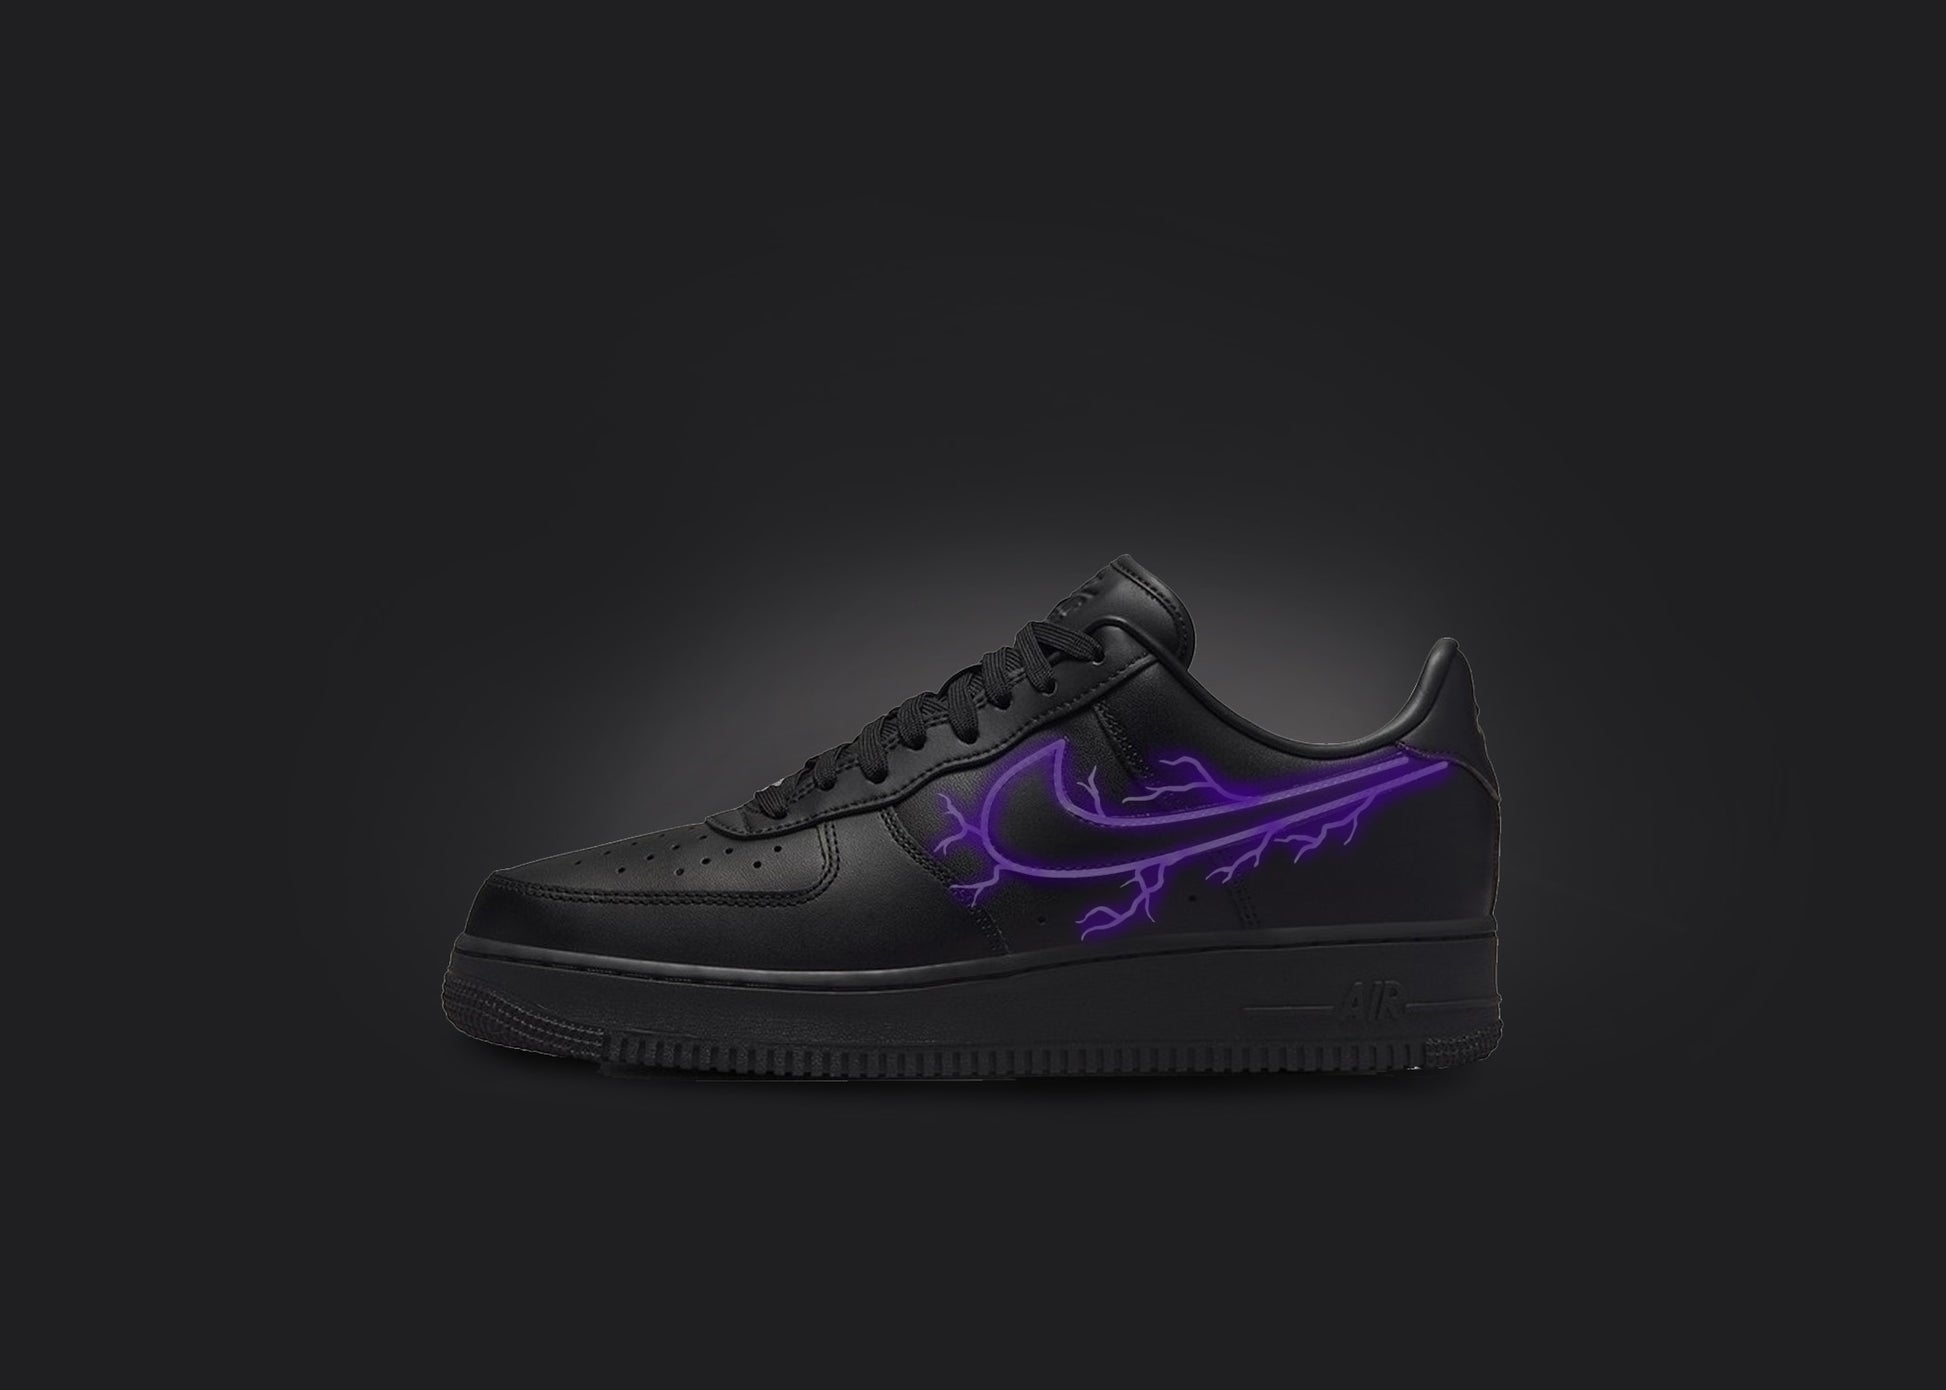 Gray and Black Customized Nike Air Force 1's